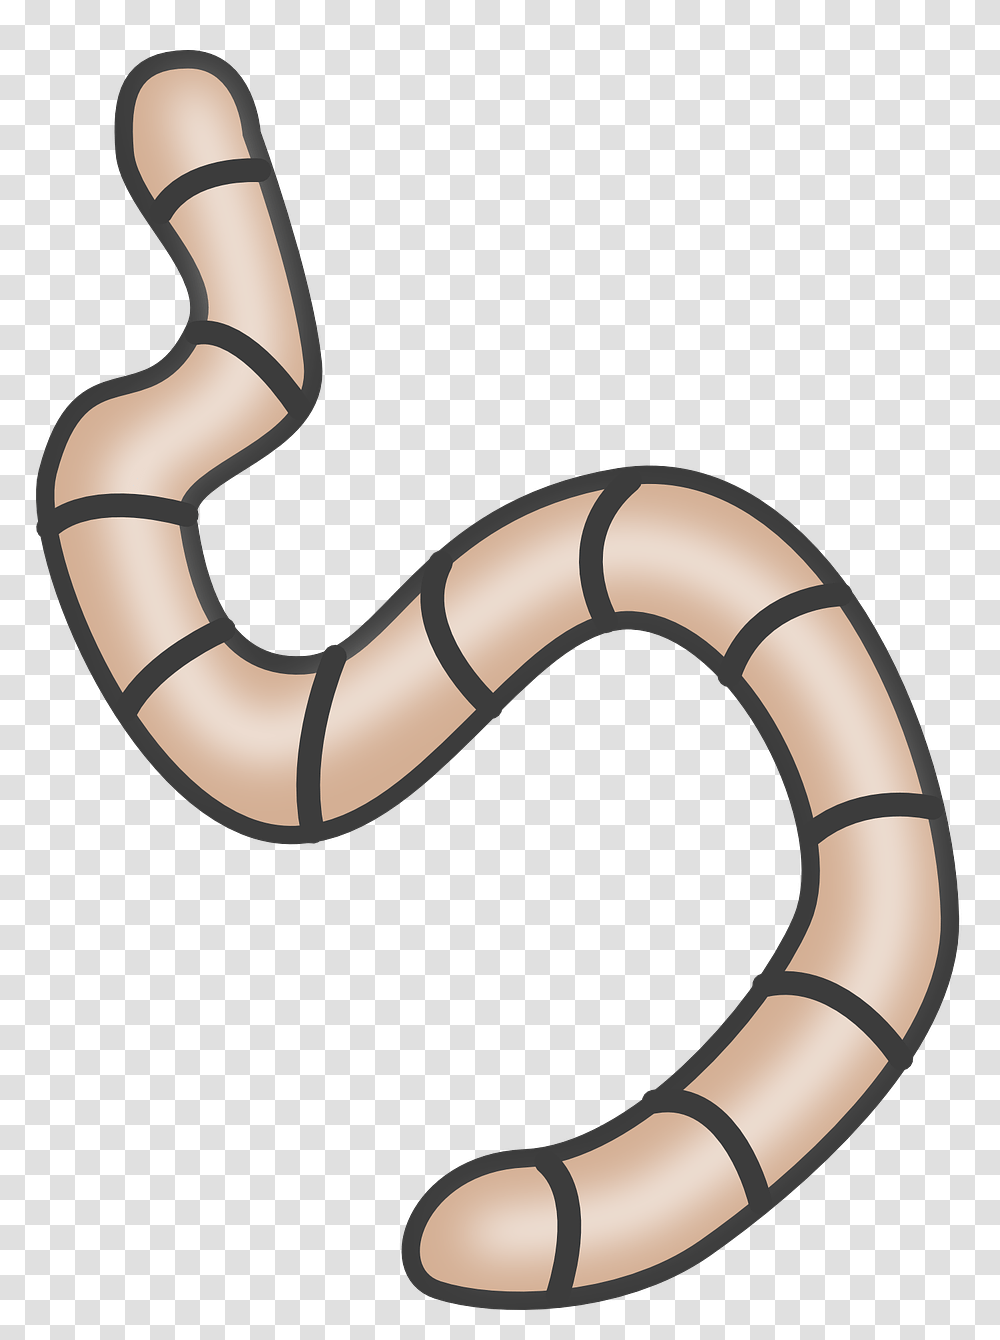 Reptilelineworm Worm Clipart, Animal, Invertebrate, Stomach Transparent Png